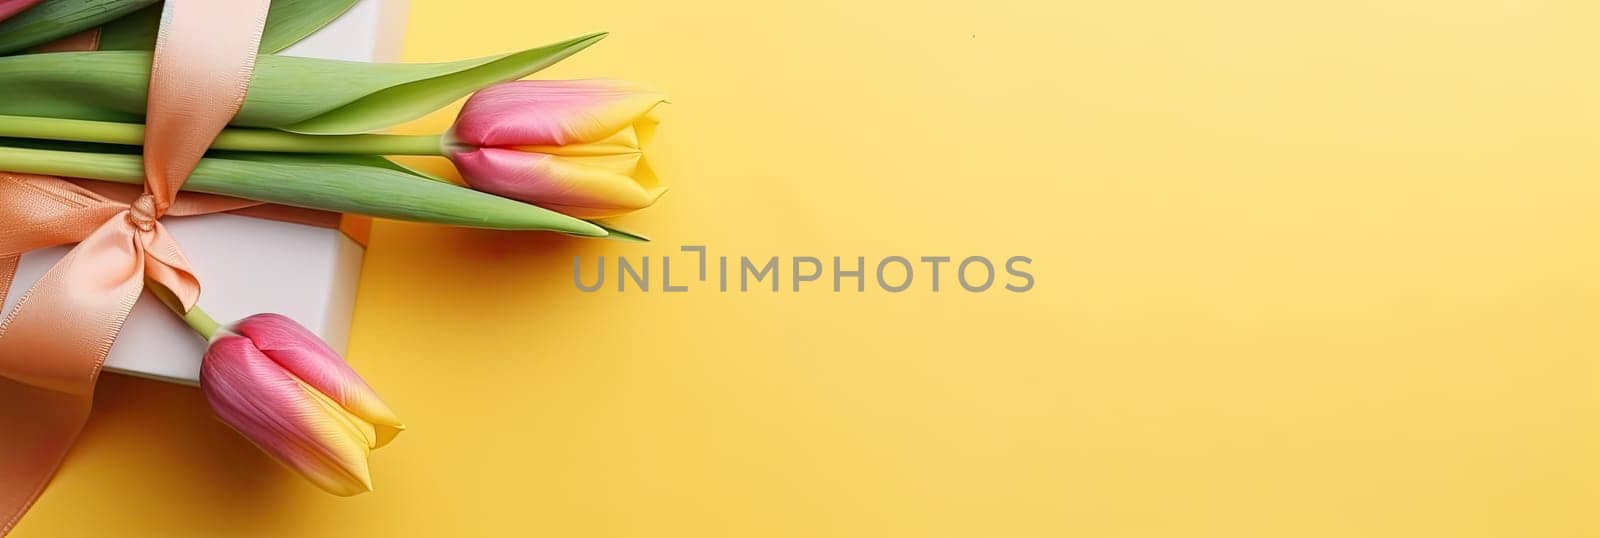 Colorful banner of spring tulips with bright flowers neatly placed on yellow background. This look is perfect for fresh seasonal concepts and evokes a sense of spring beauty and joy